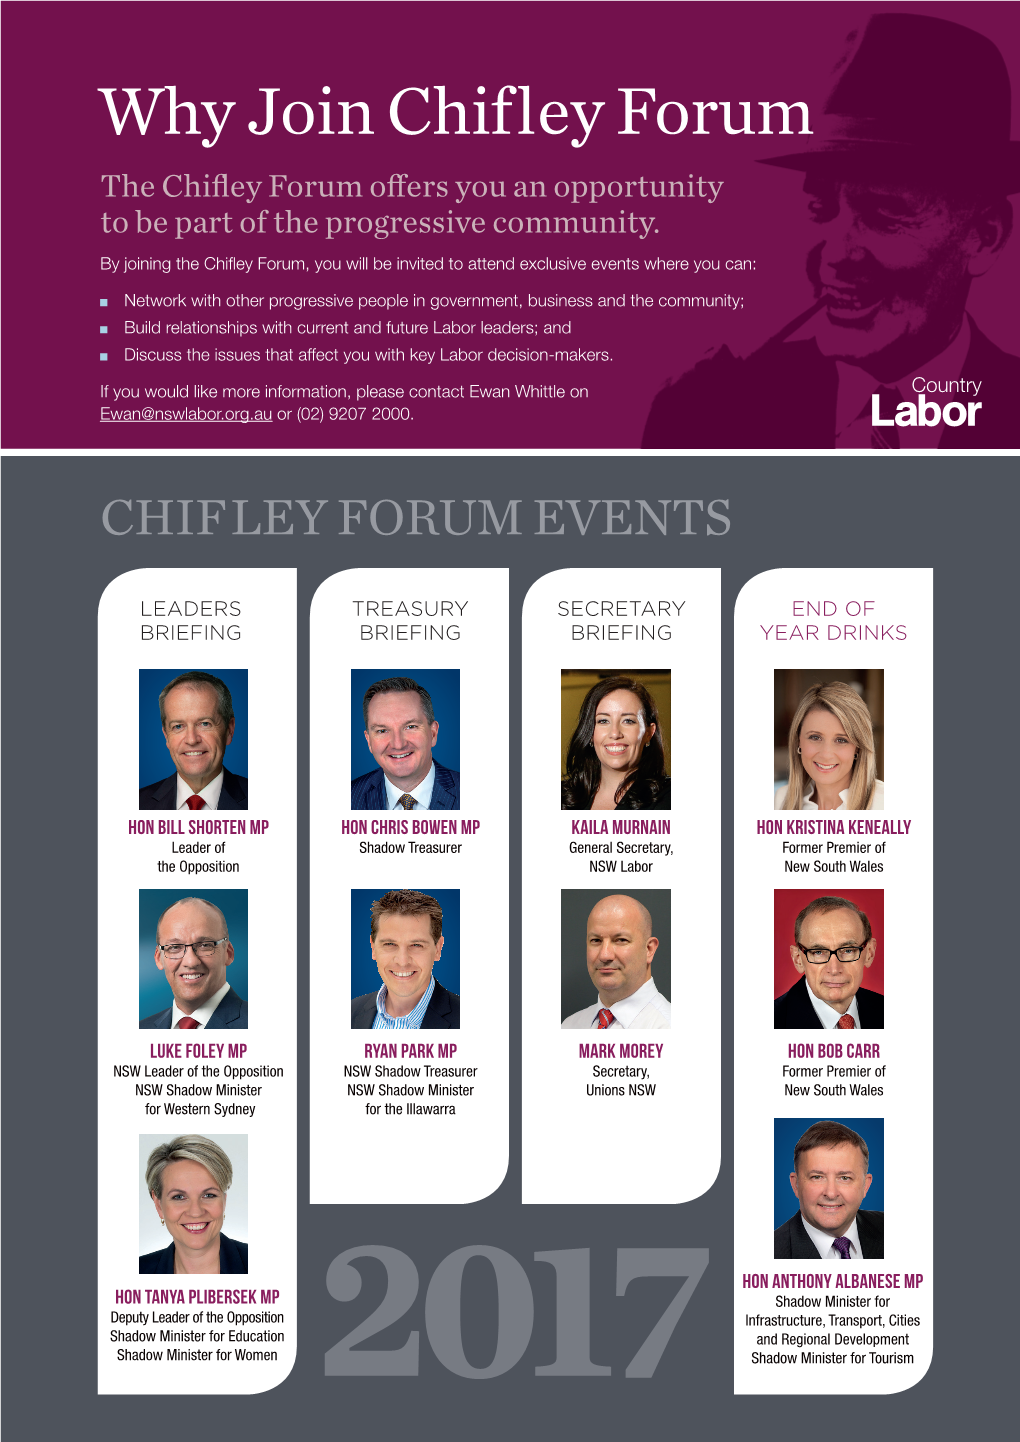 Why Join Chifley Forum the Chifley Forum Offers You an Opportunity to Be Part of the Progressive Community